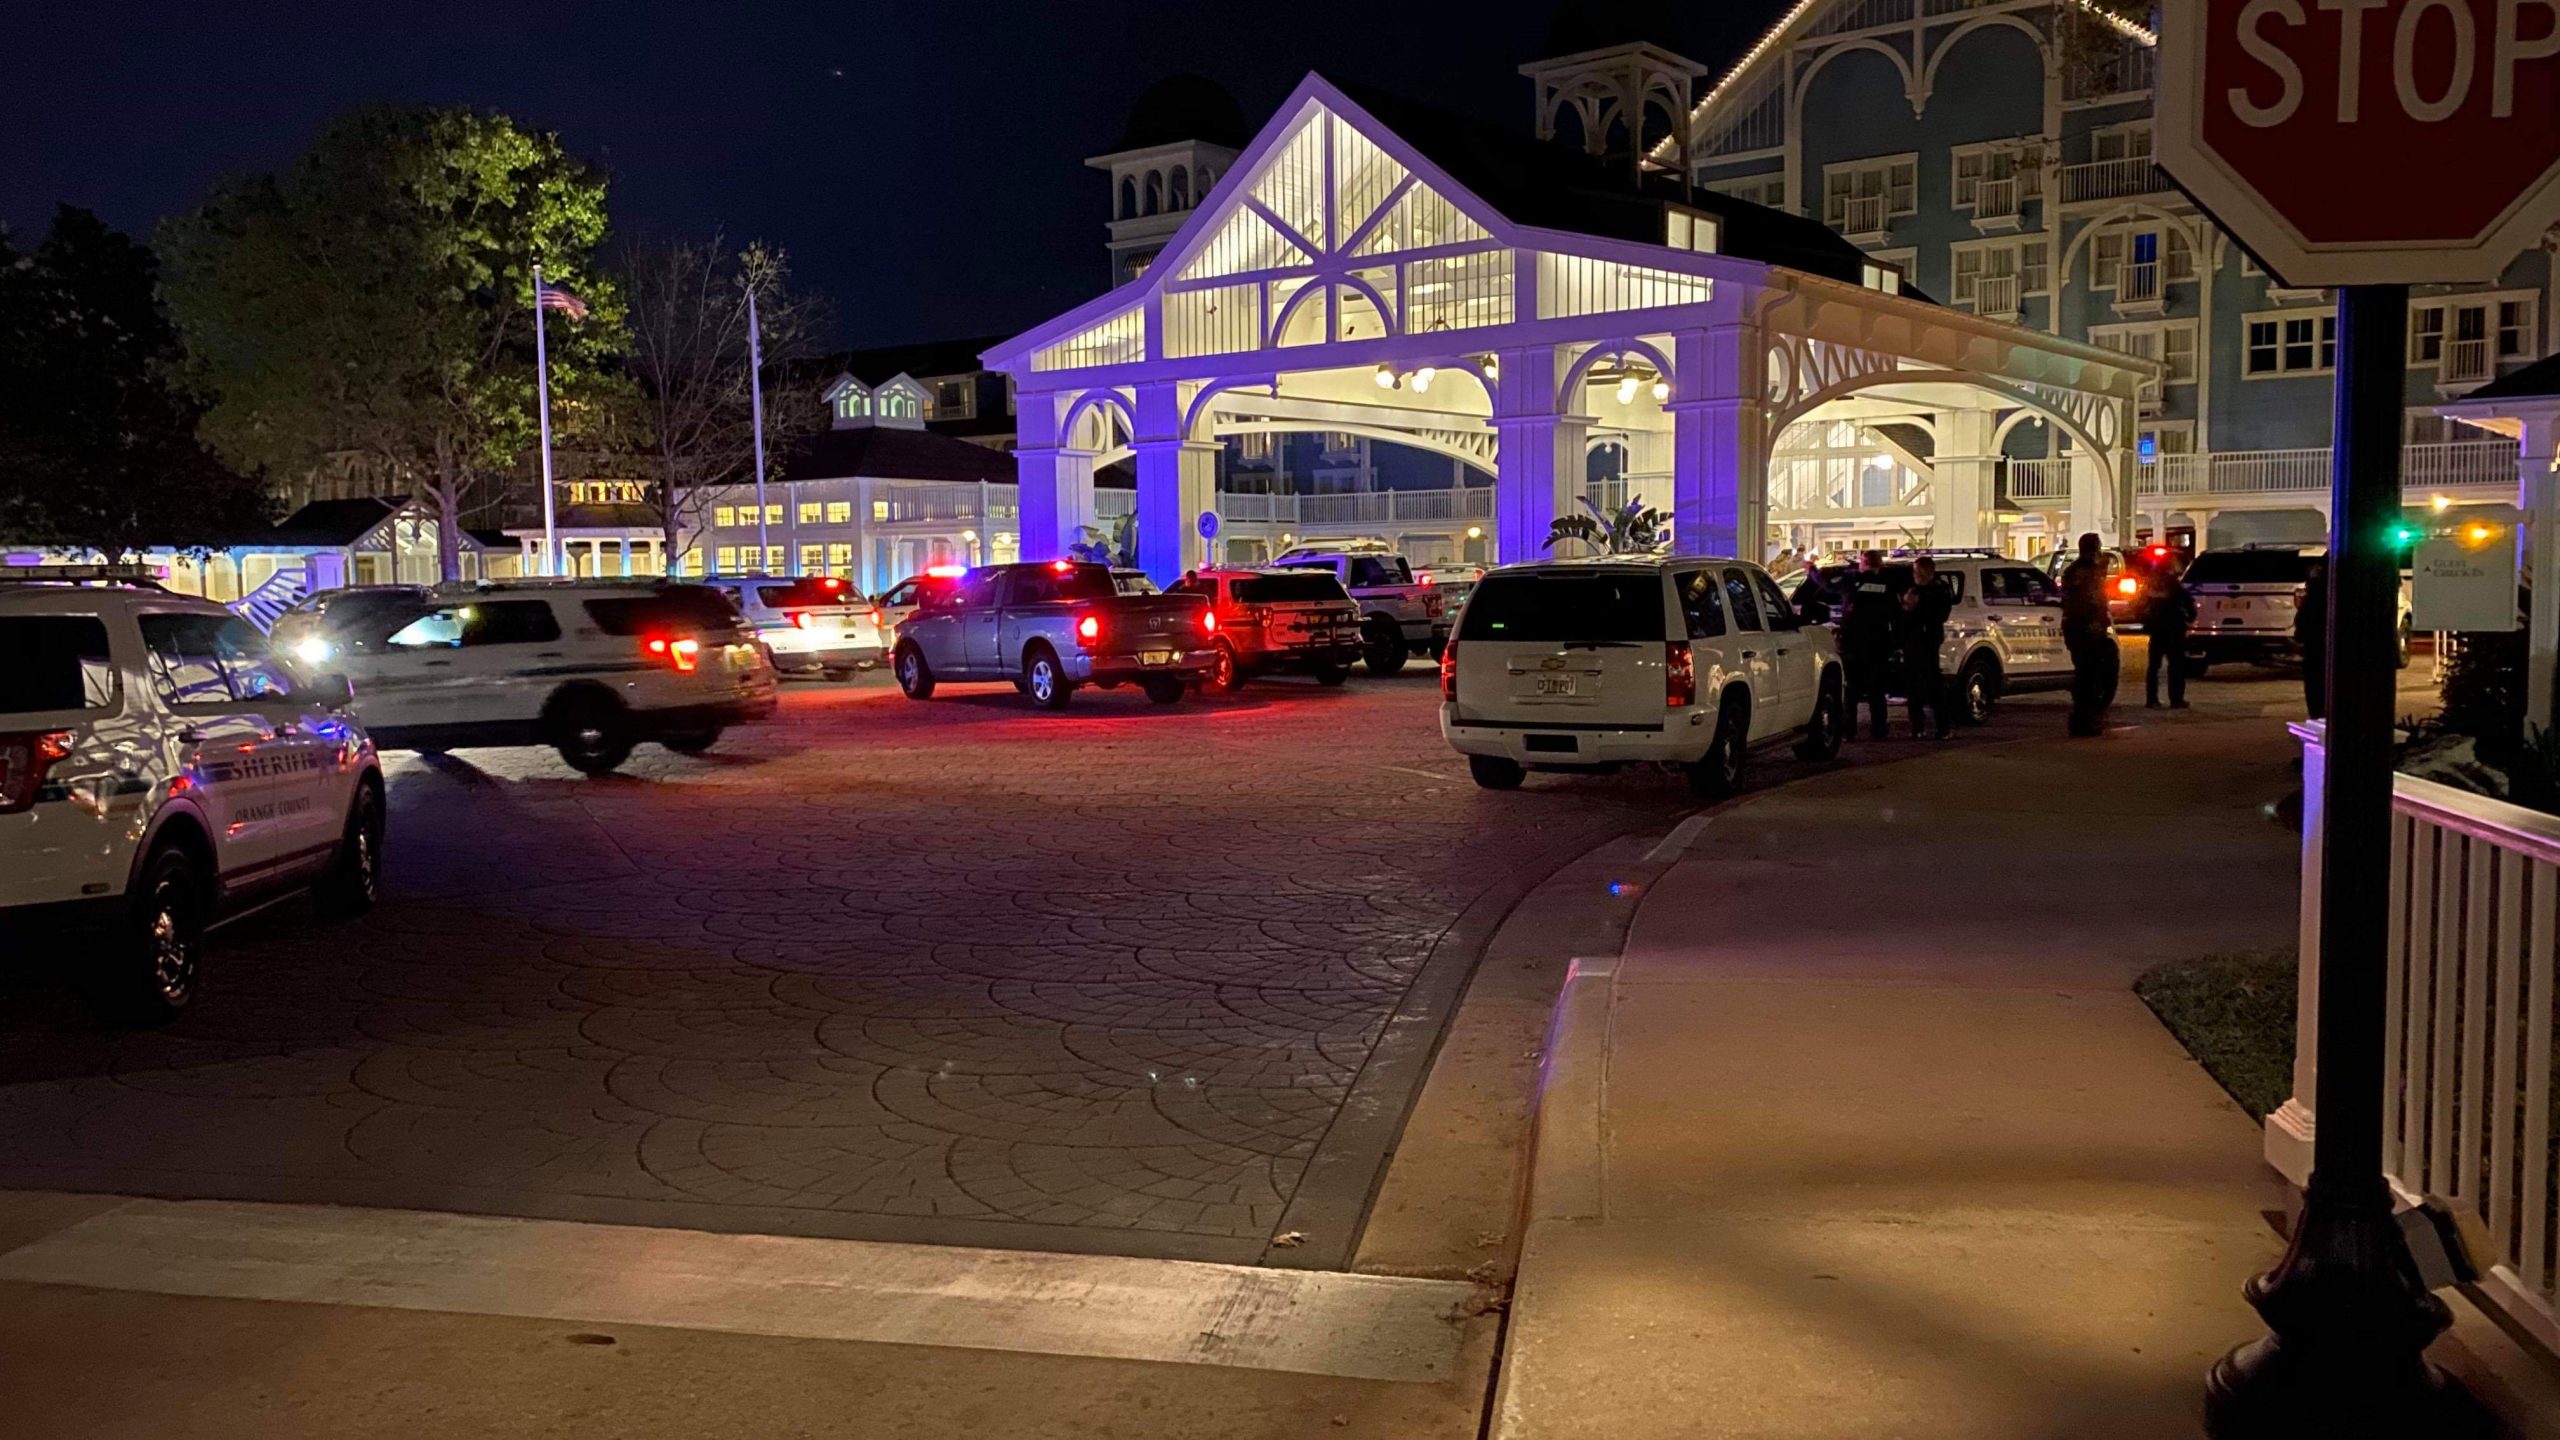 Reports of a suspicious person at Disney’s Beach Club Resort